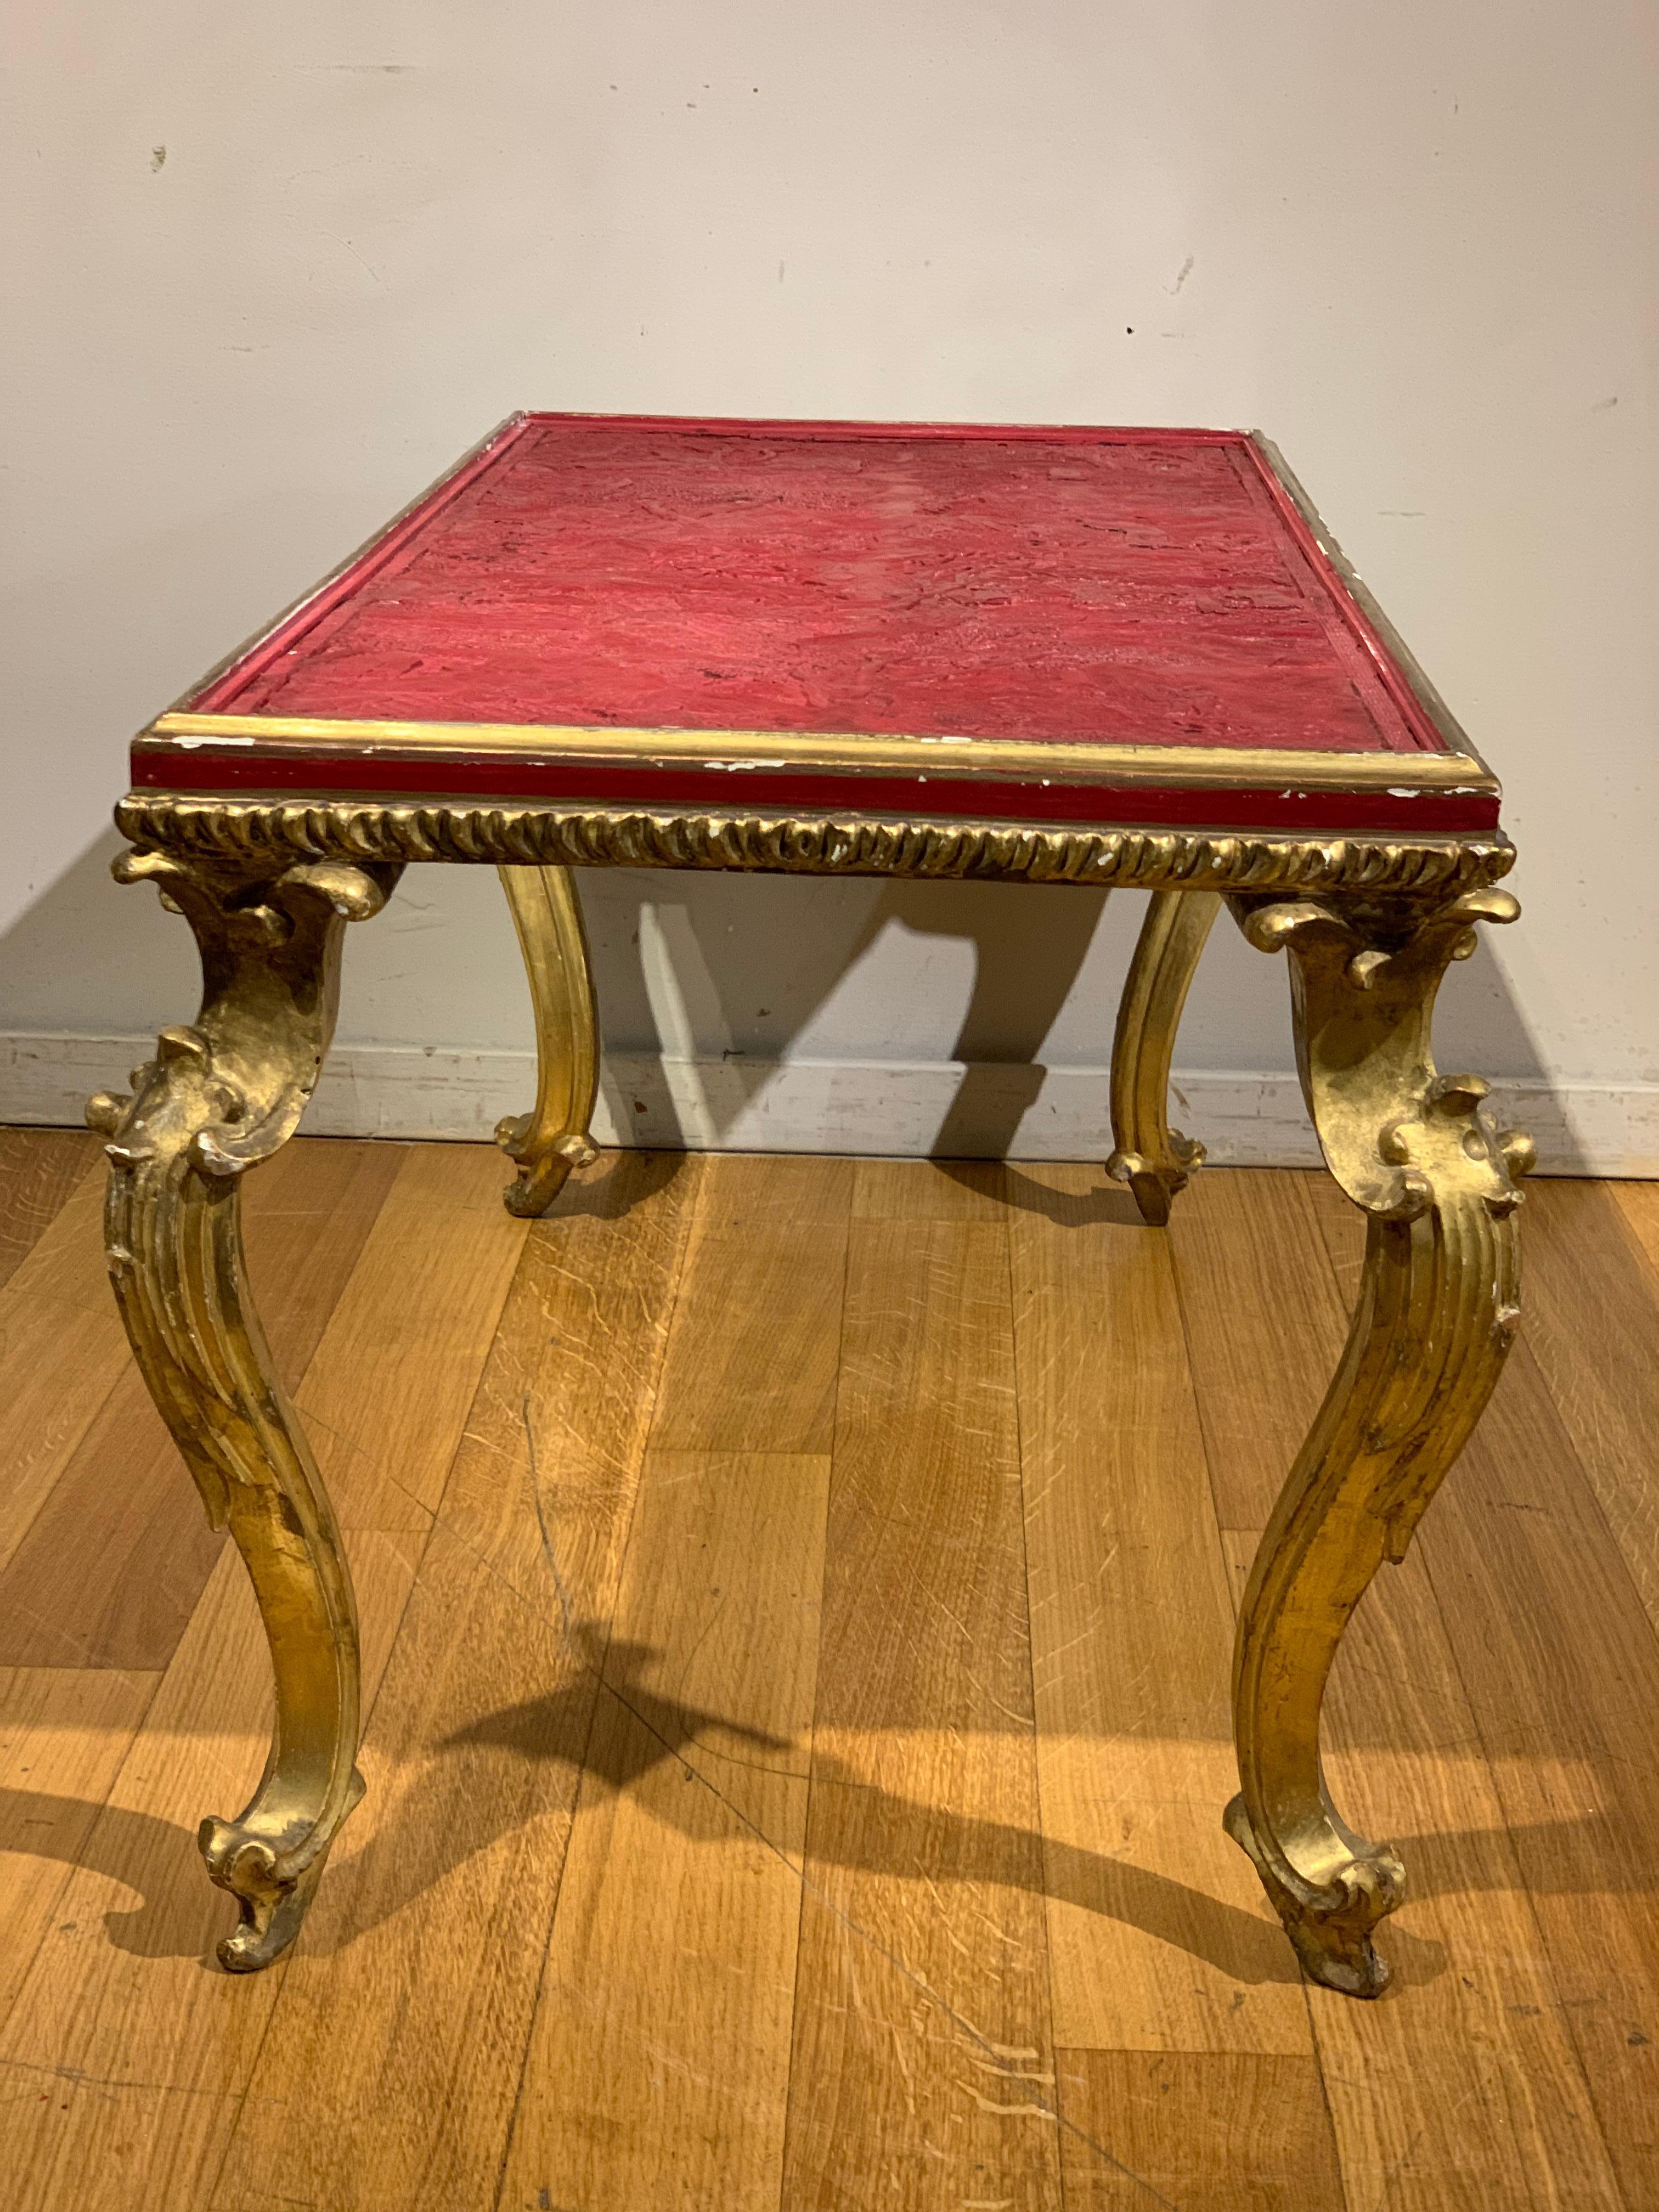 Early 19th Century Small Giltwood Table with Chinese Red Lacquer Top 10